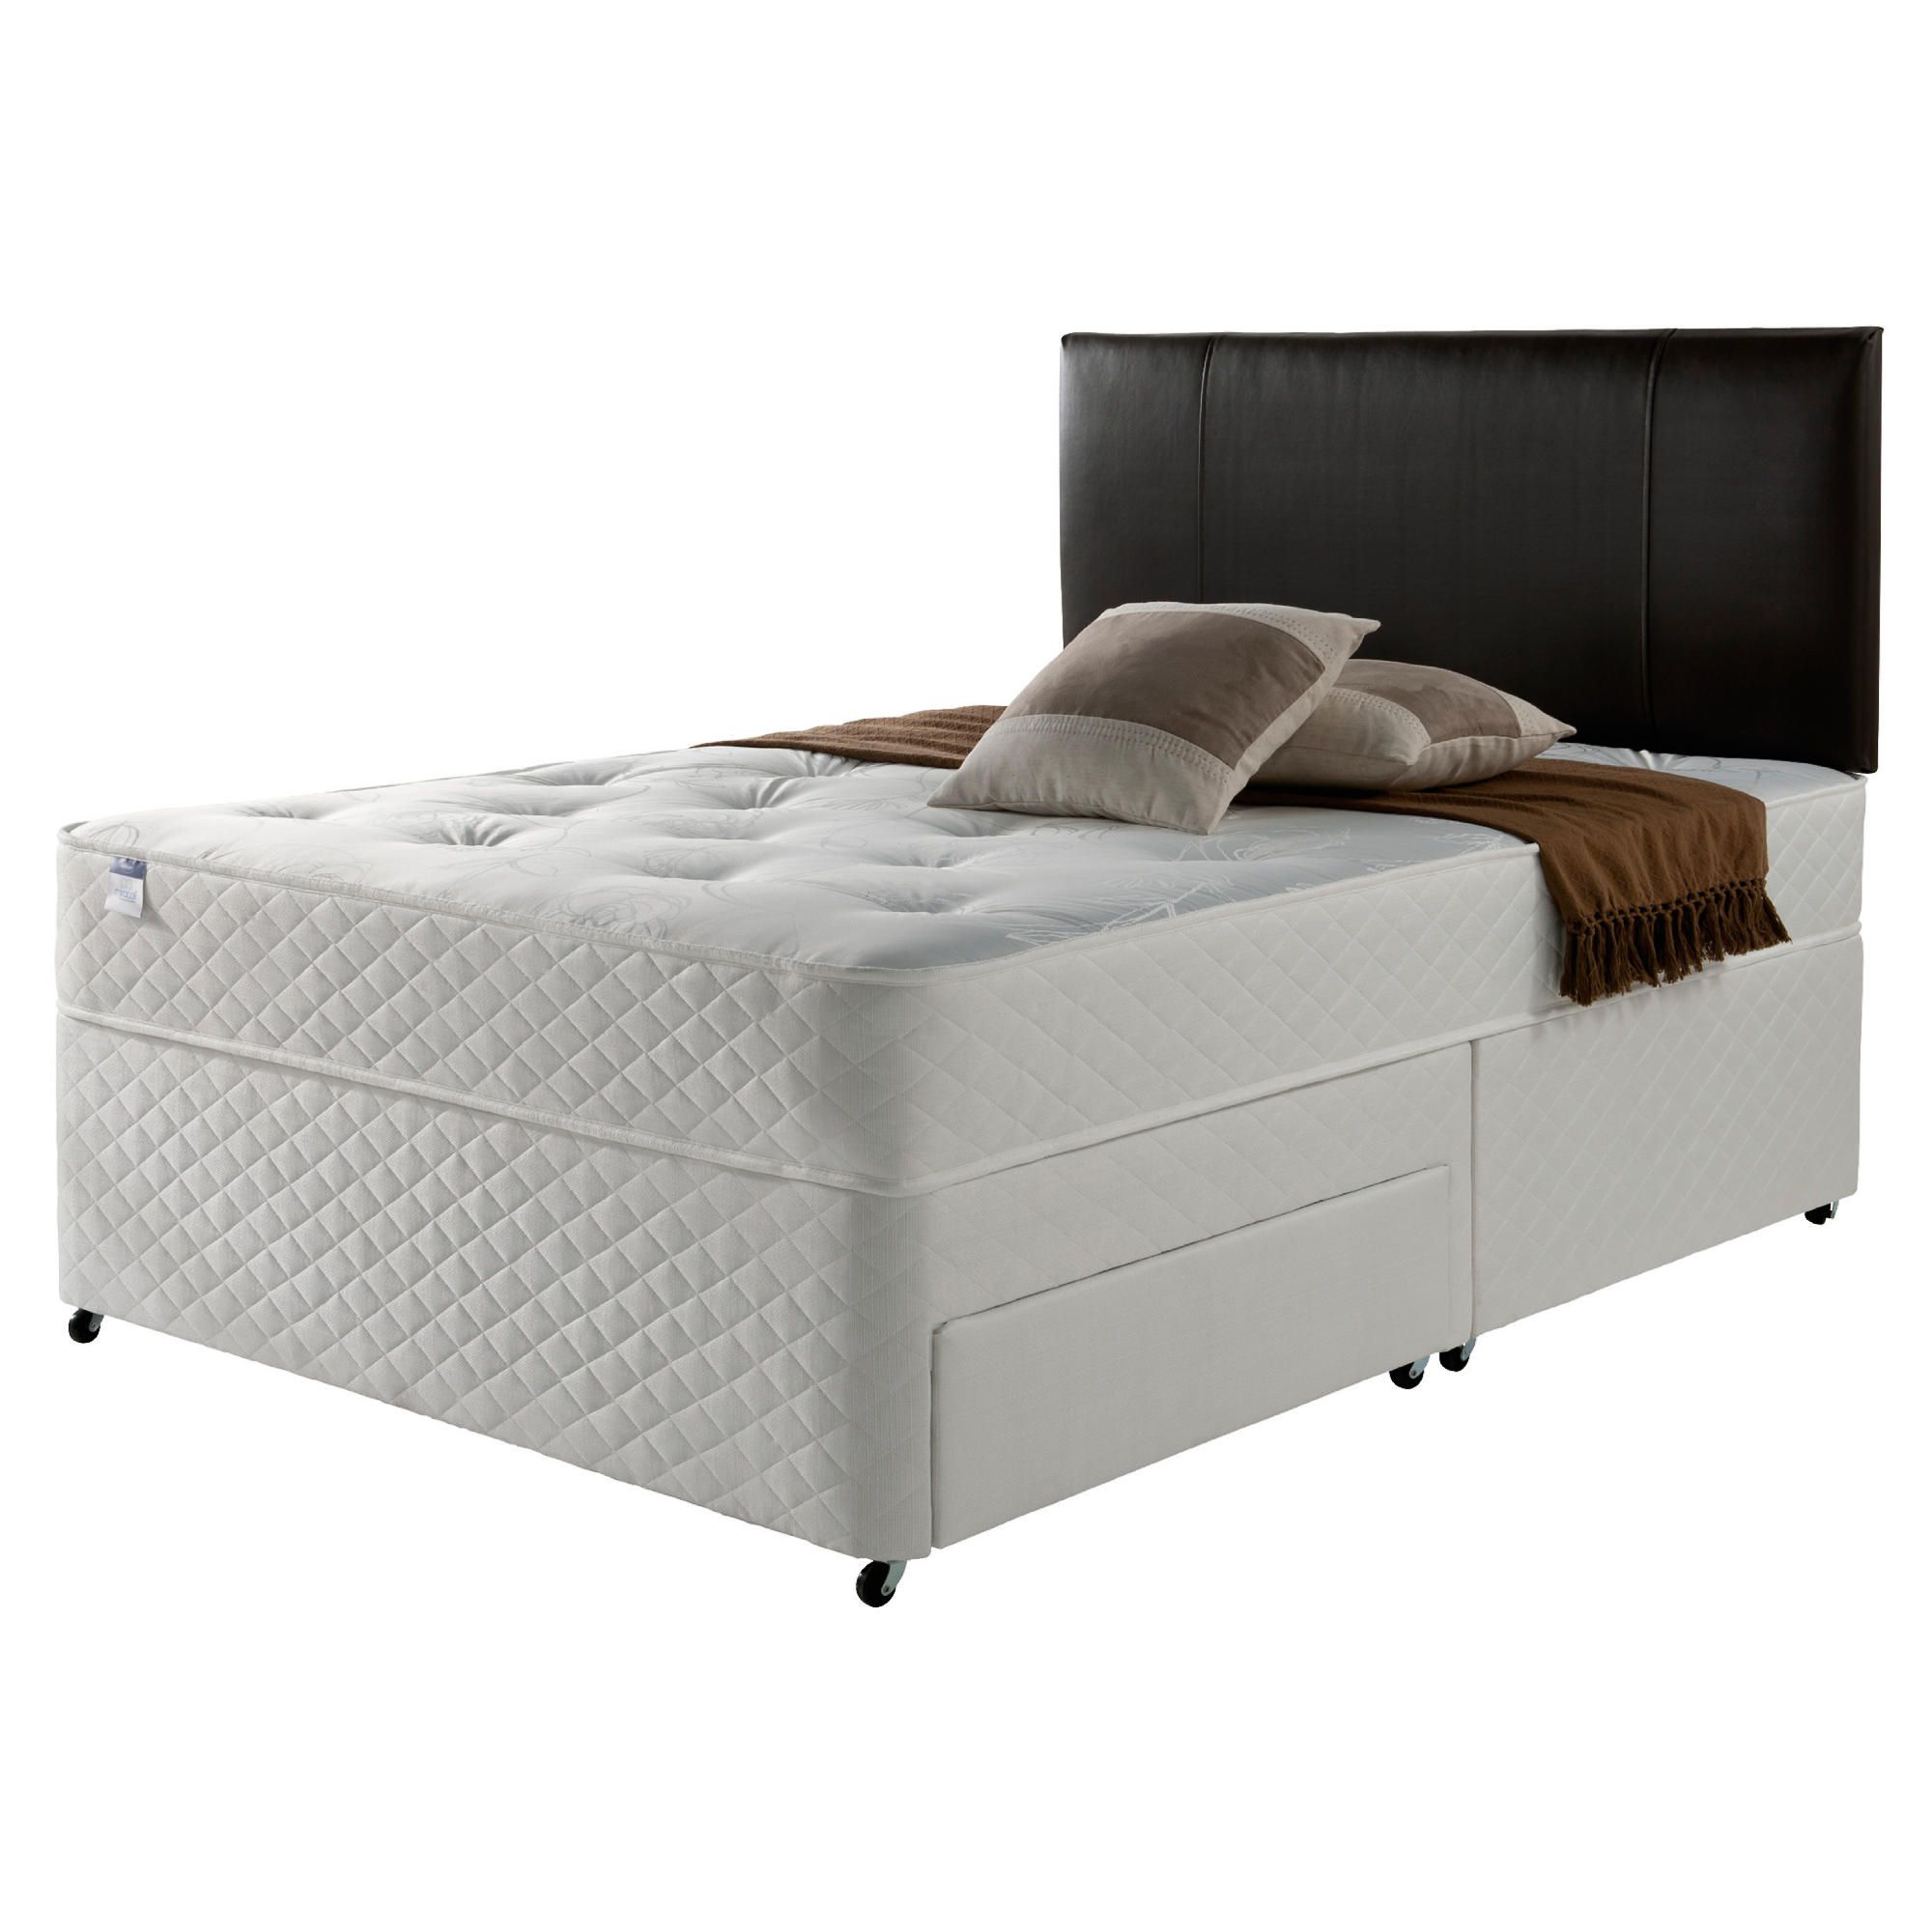 Silentnight Miracoil Comfort Ortho Tuft Non Storage Double Divan at Tesco Direct